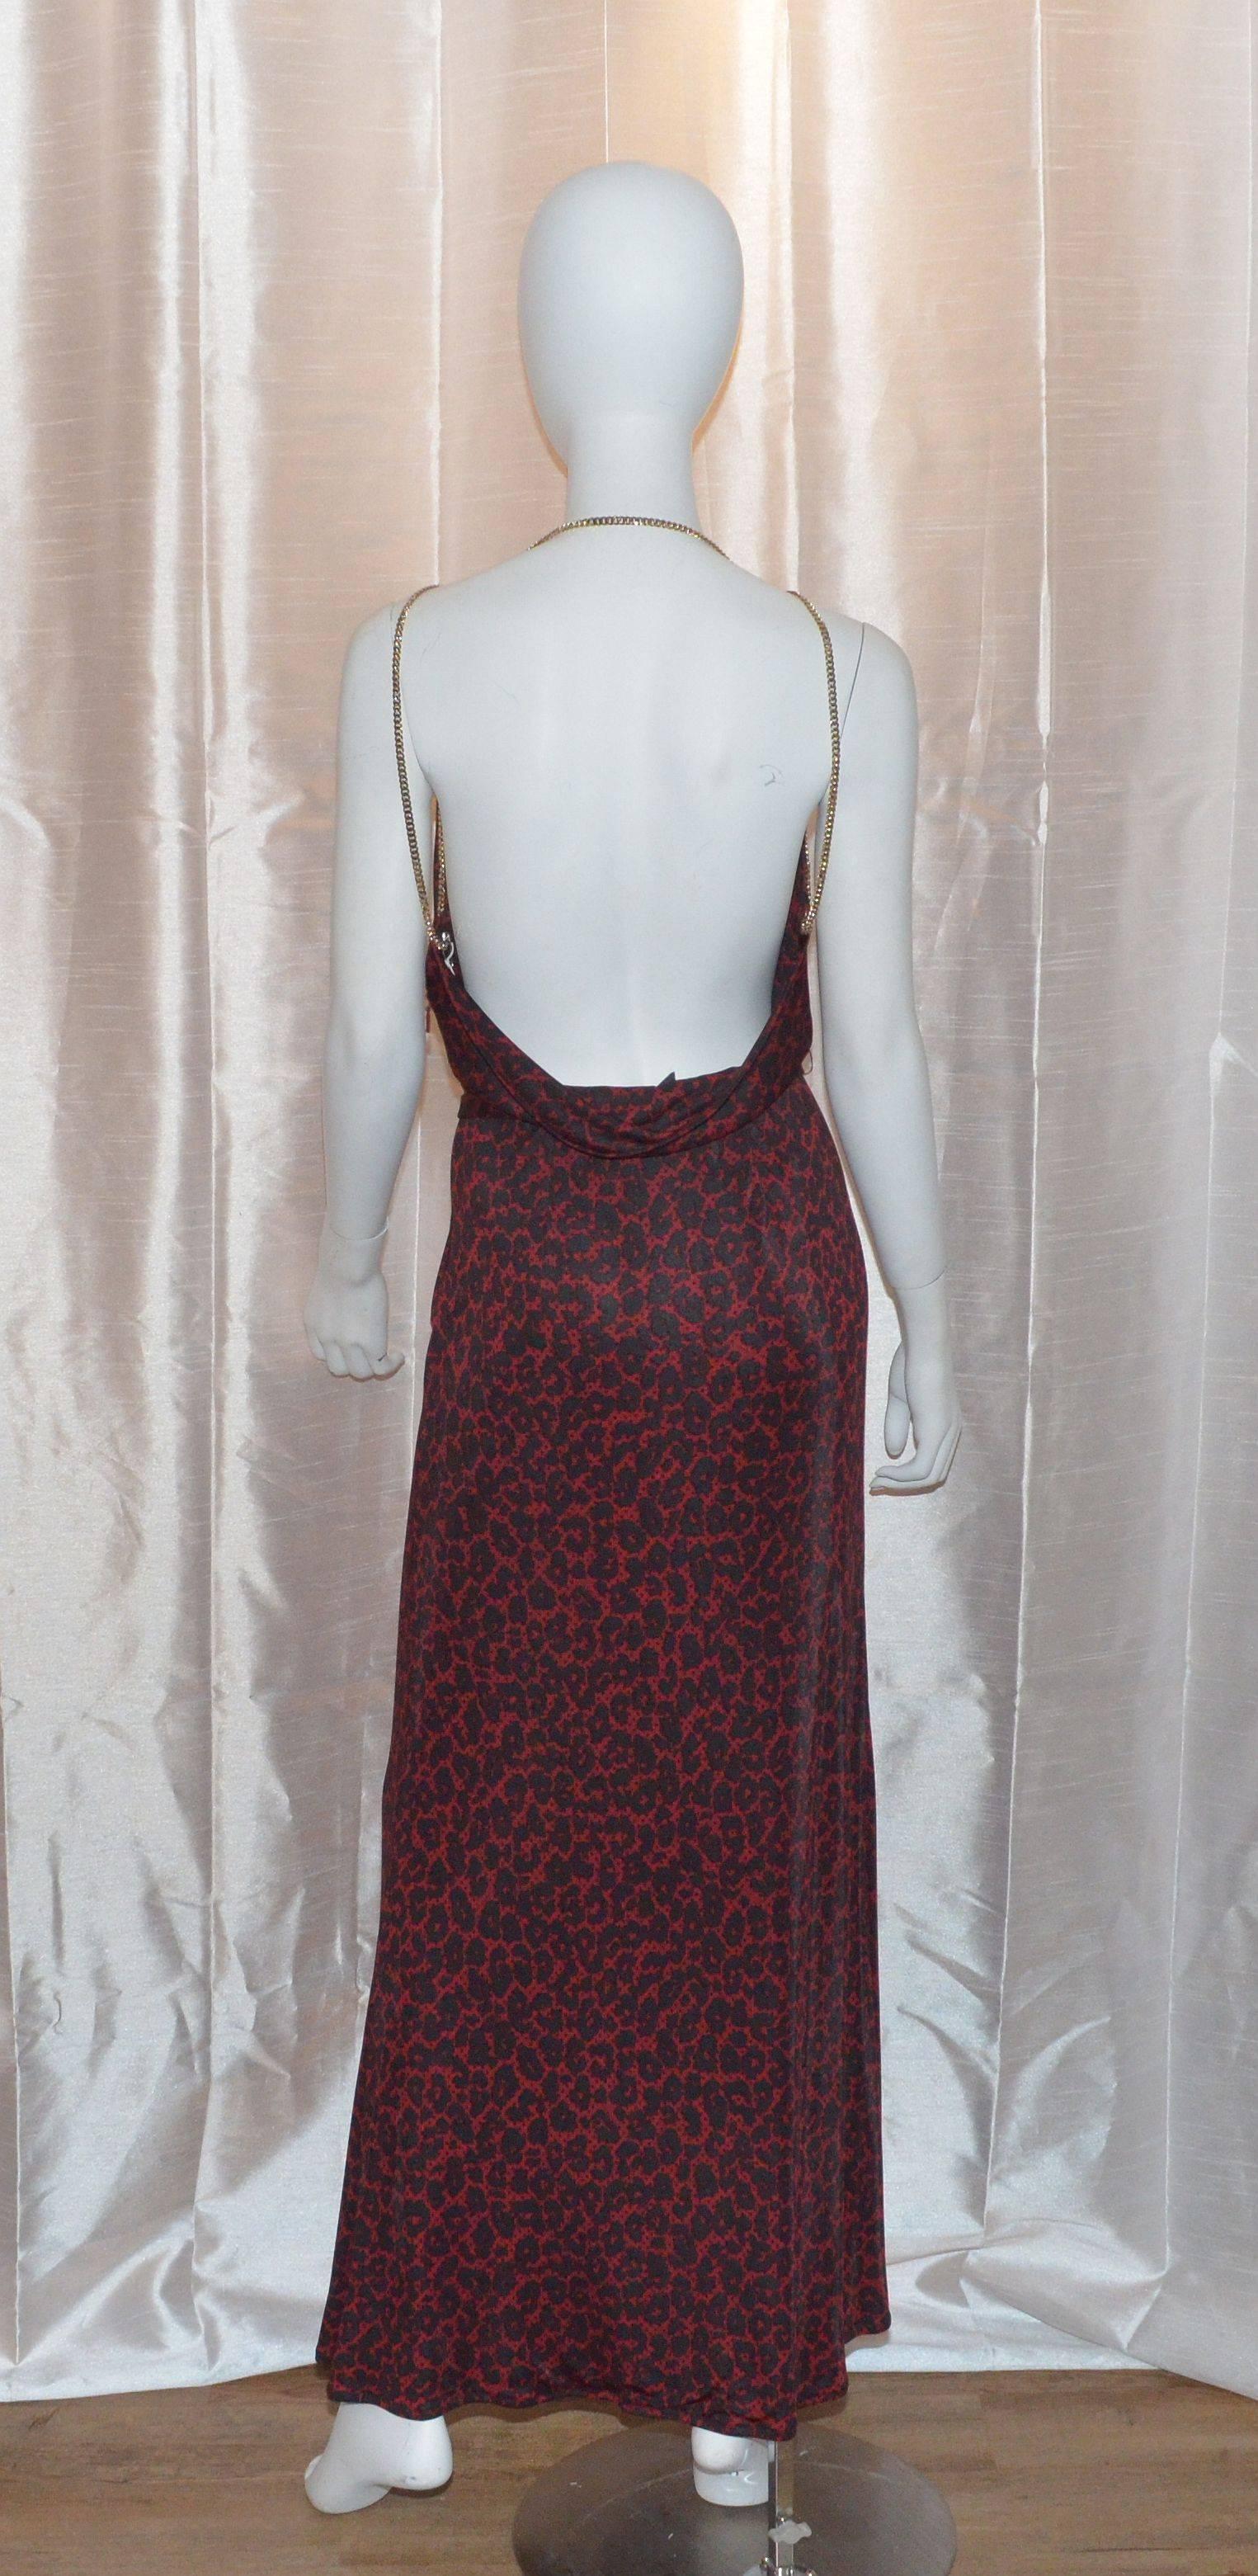 Gucci 2006 Fall RTW Jersey Animal Print Dress with Chains  In Excellent Condition In Carmel, CA